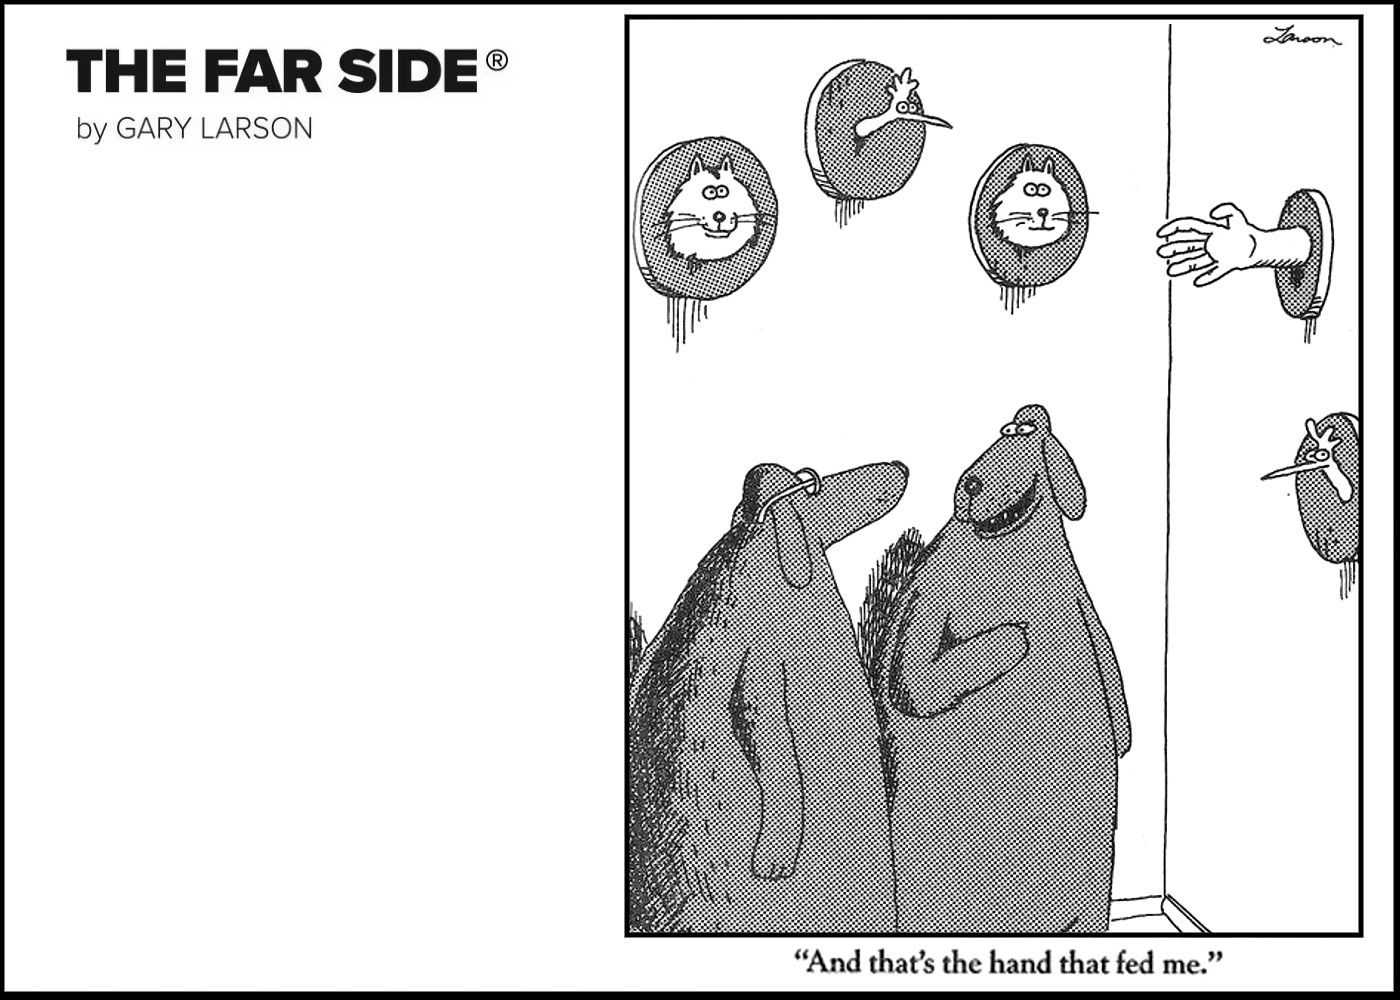 Stephen King’s Favorite Far Side Comic Shows How It Mastered Horror-Comedy